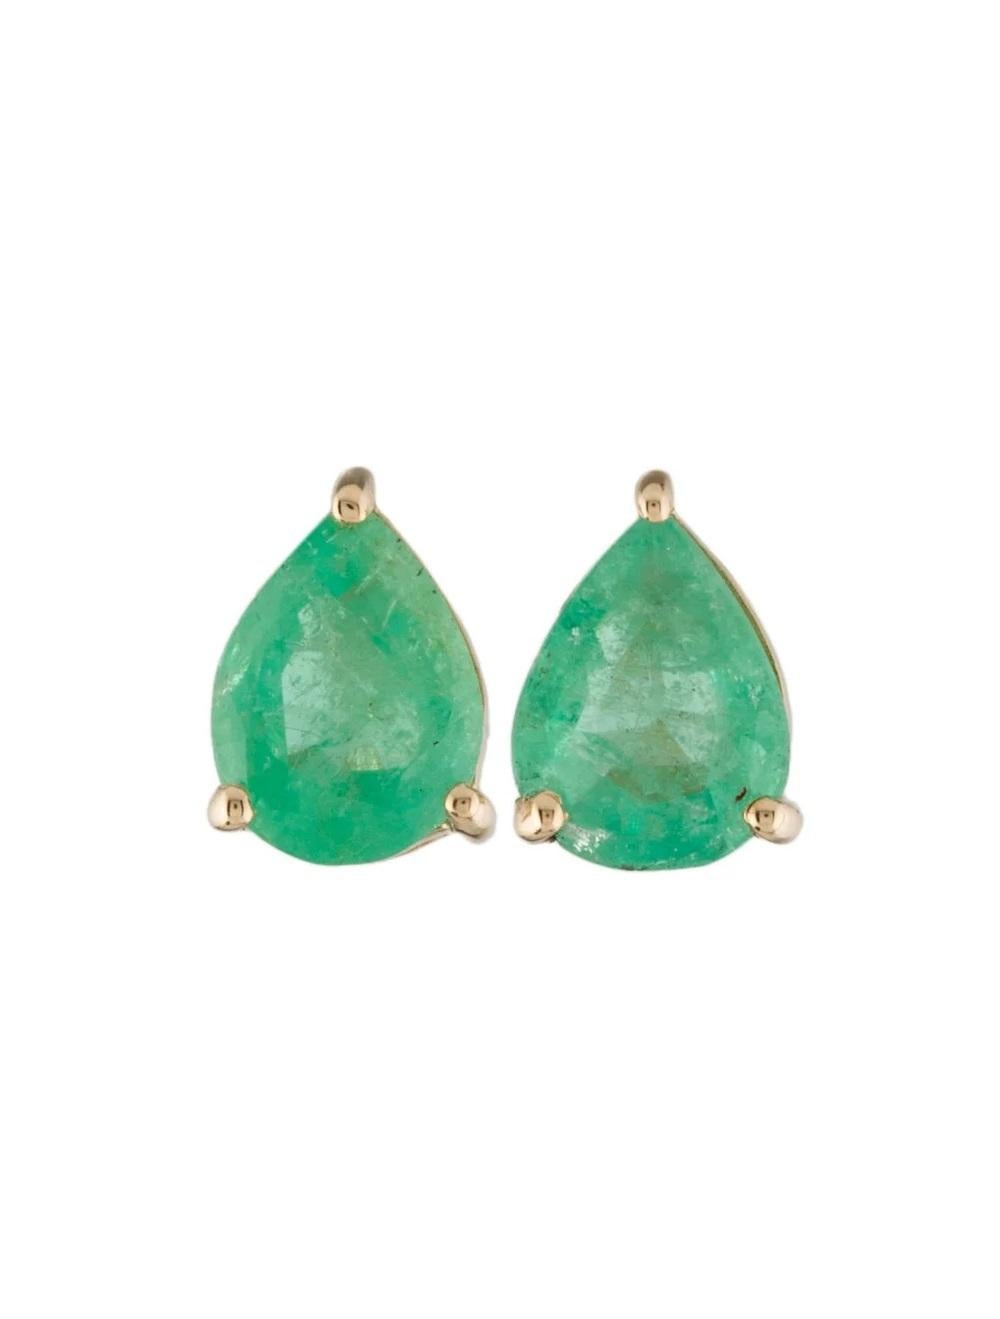 14K 1.83ctw Emerald Stud Earrings: Timeless Elegance in Stunning Green Gemstone In New Condition For Sale In Holtsville, NY